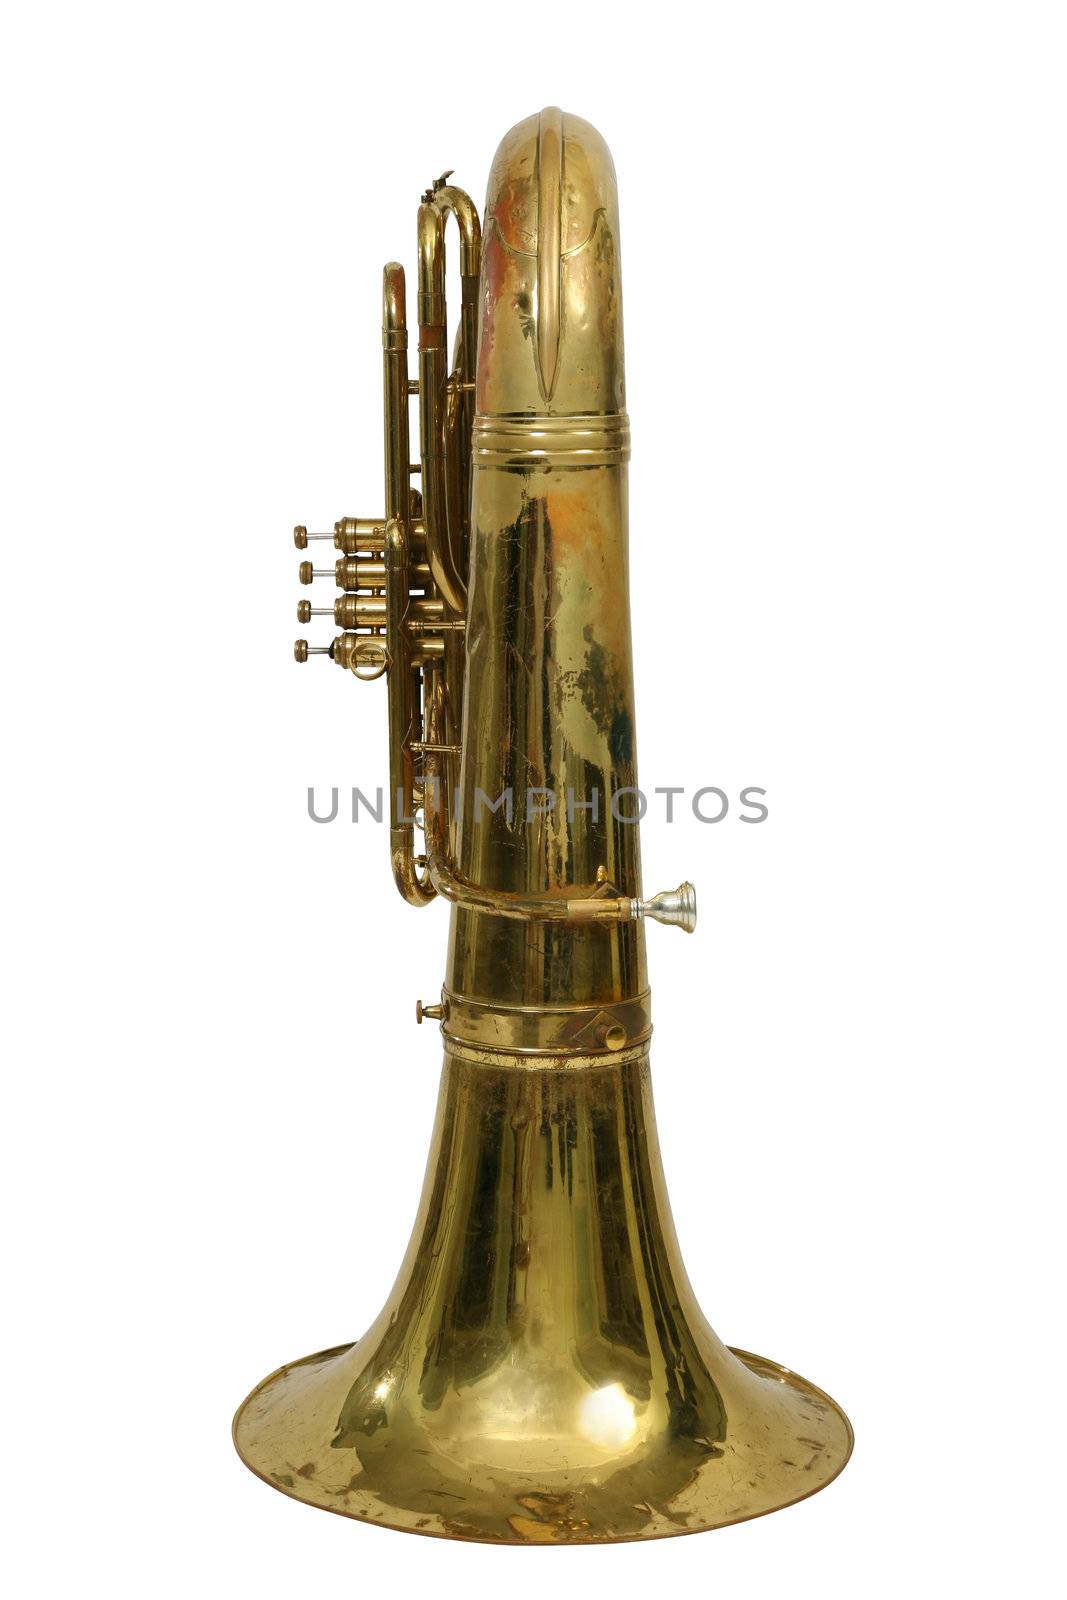 Wind musical tuba on a white background by skutin